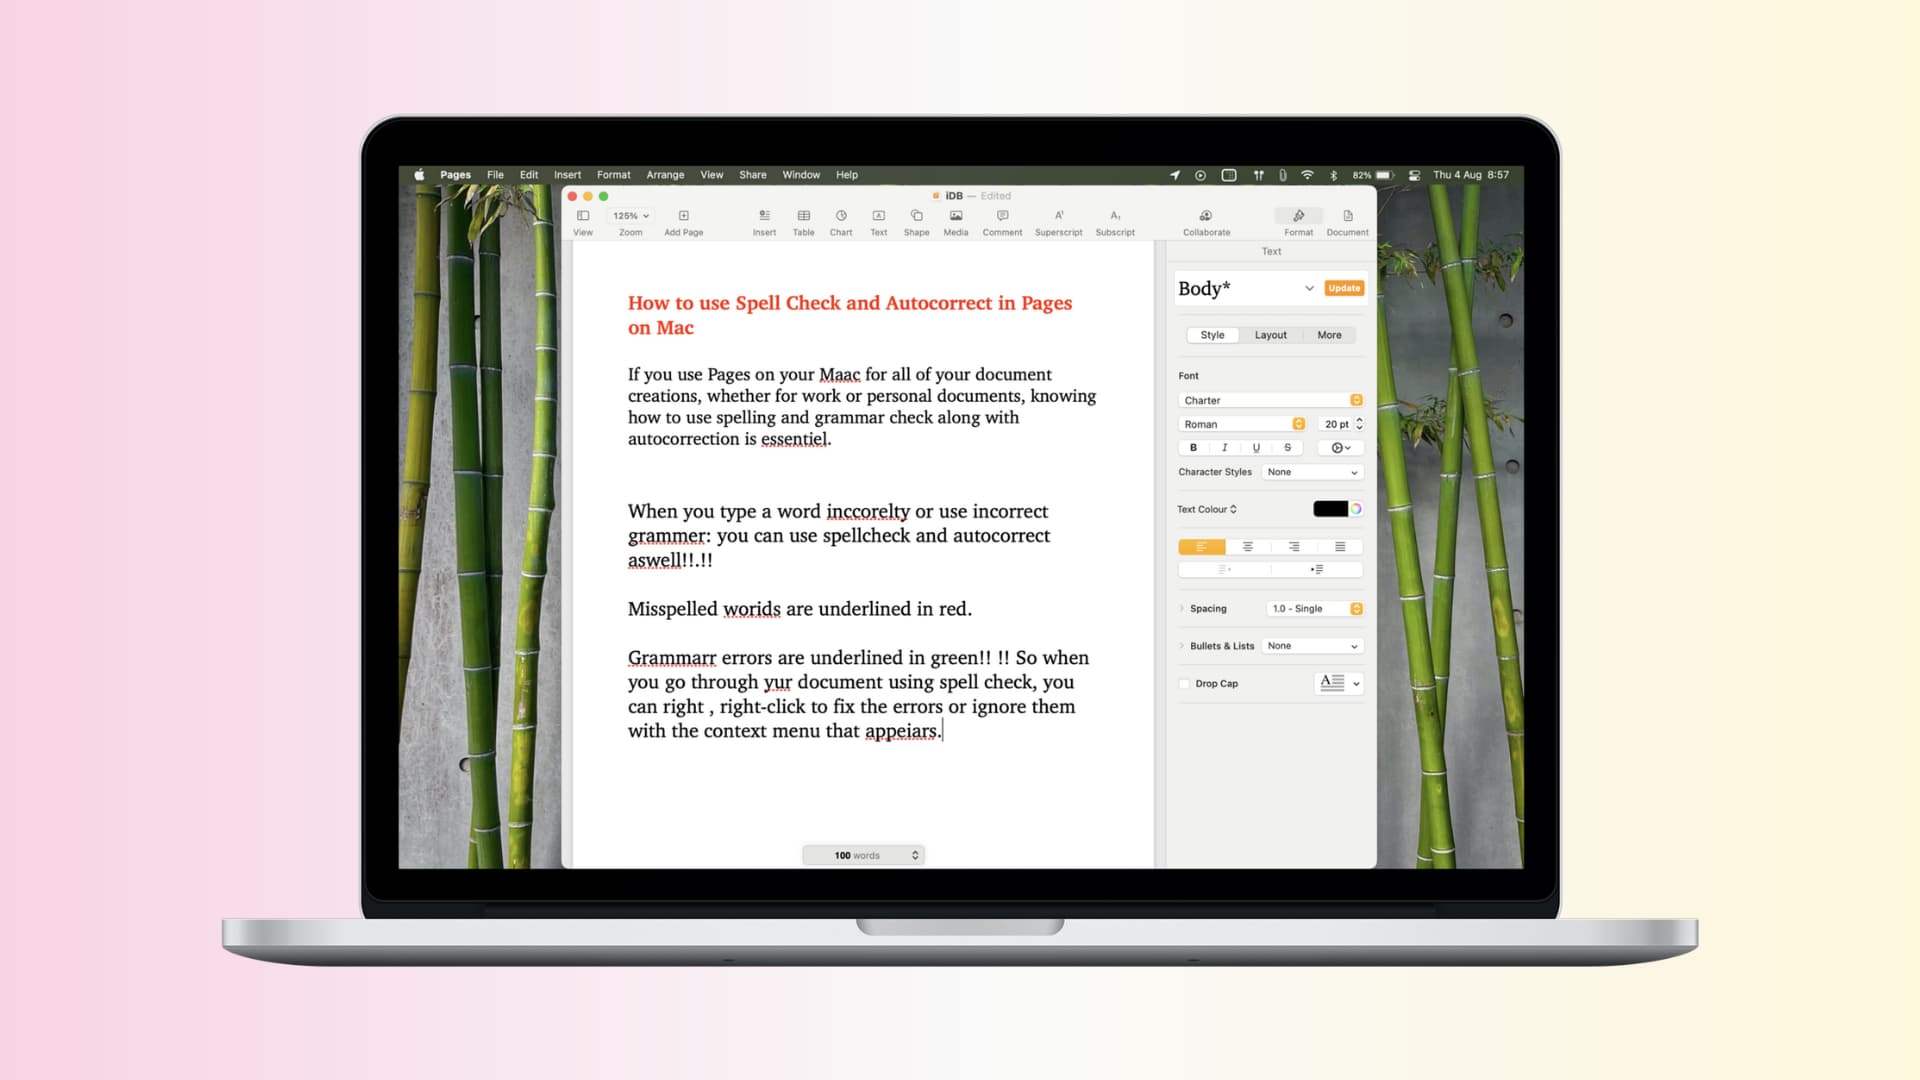 Auto-correct and spell check in the Pages app on Mac